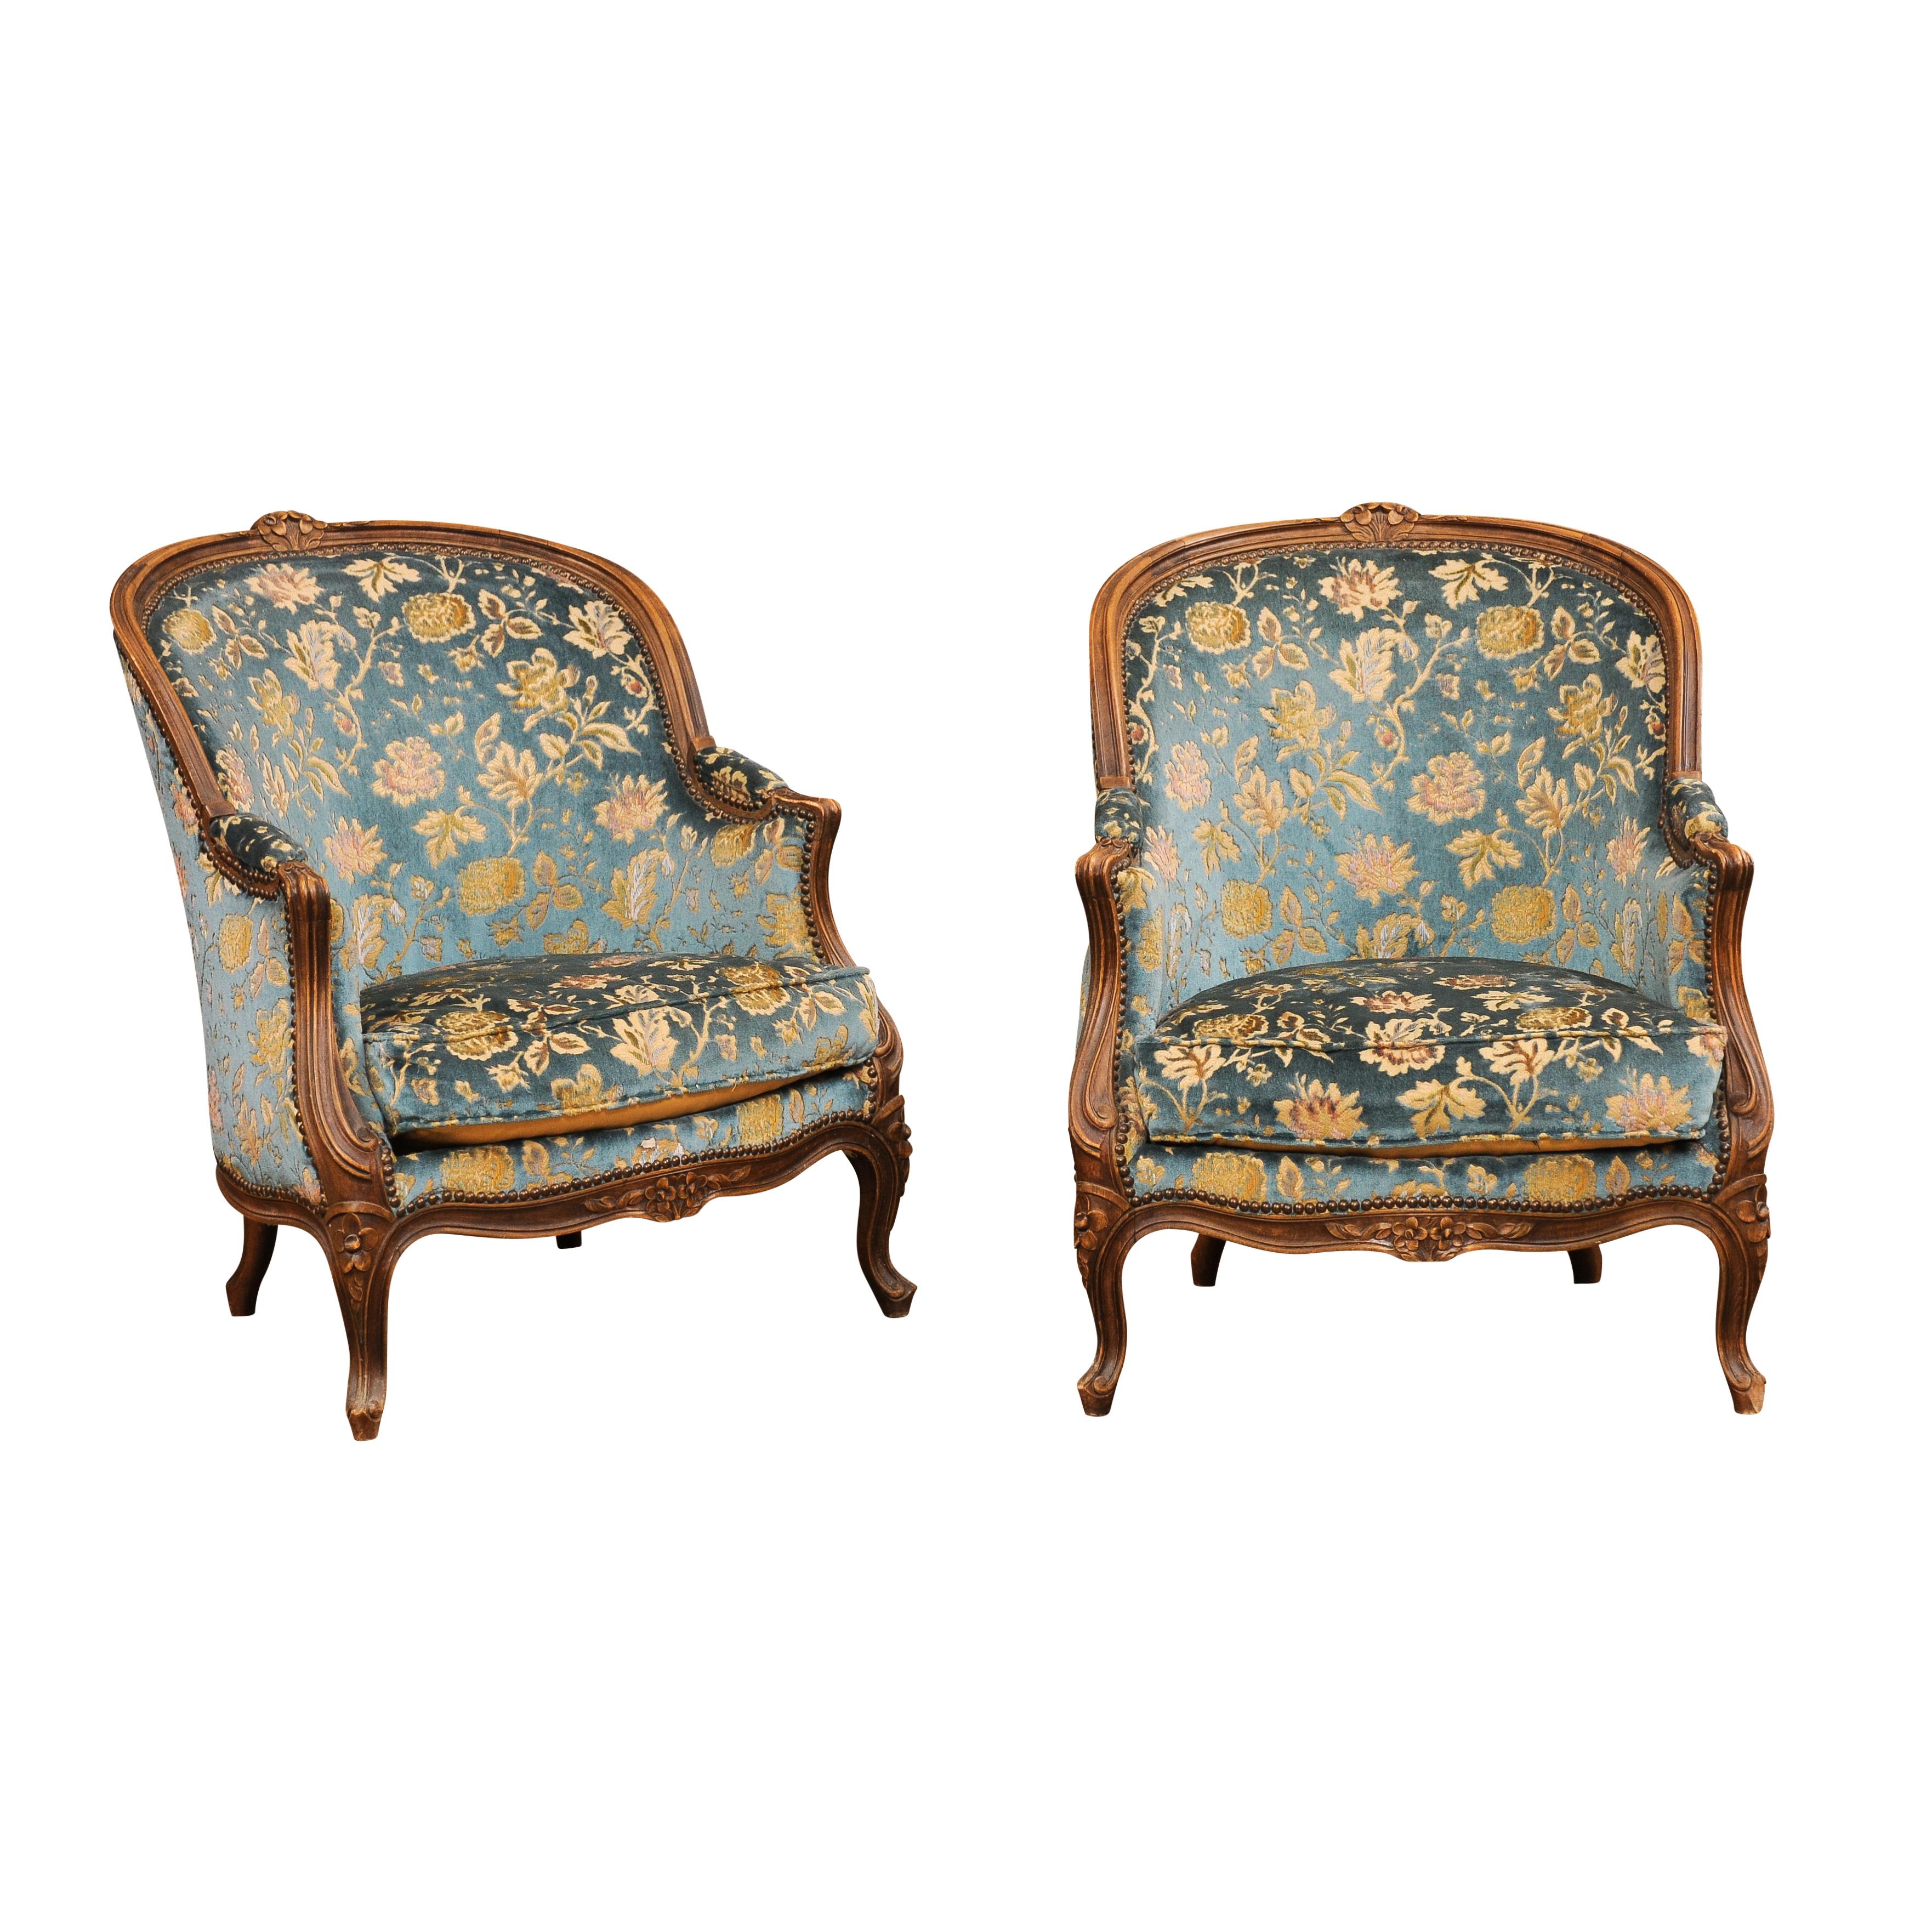 A pair of French Louis XV style walnut bergères chairs from the 19th century with carved crests, scrolling arms, floral carved apron, cabriole legs and floral upholstery. Enhance your living space with this exquisite pair of French Louis XV style